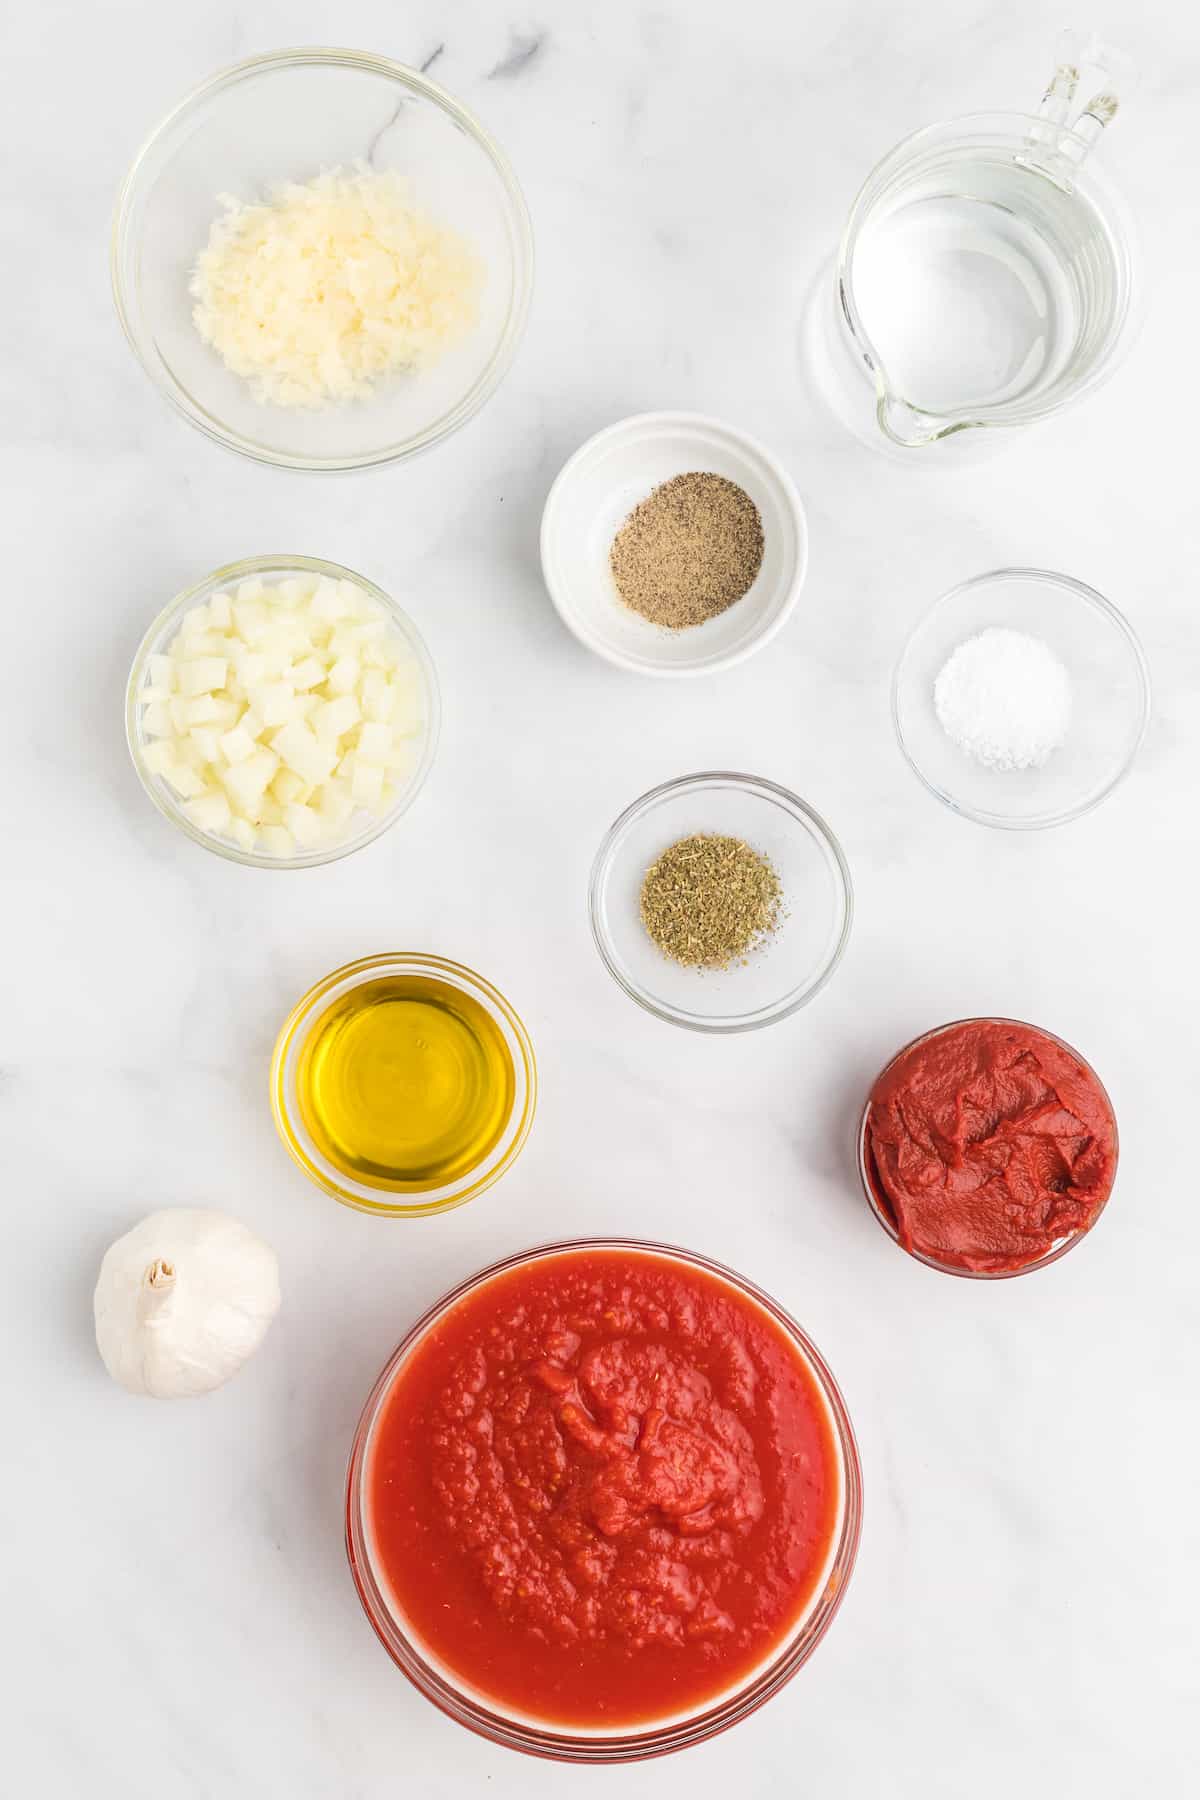 ingredients for the marinara sauce in small glass bowls.